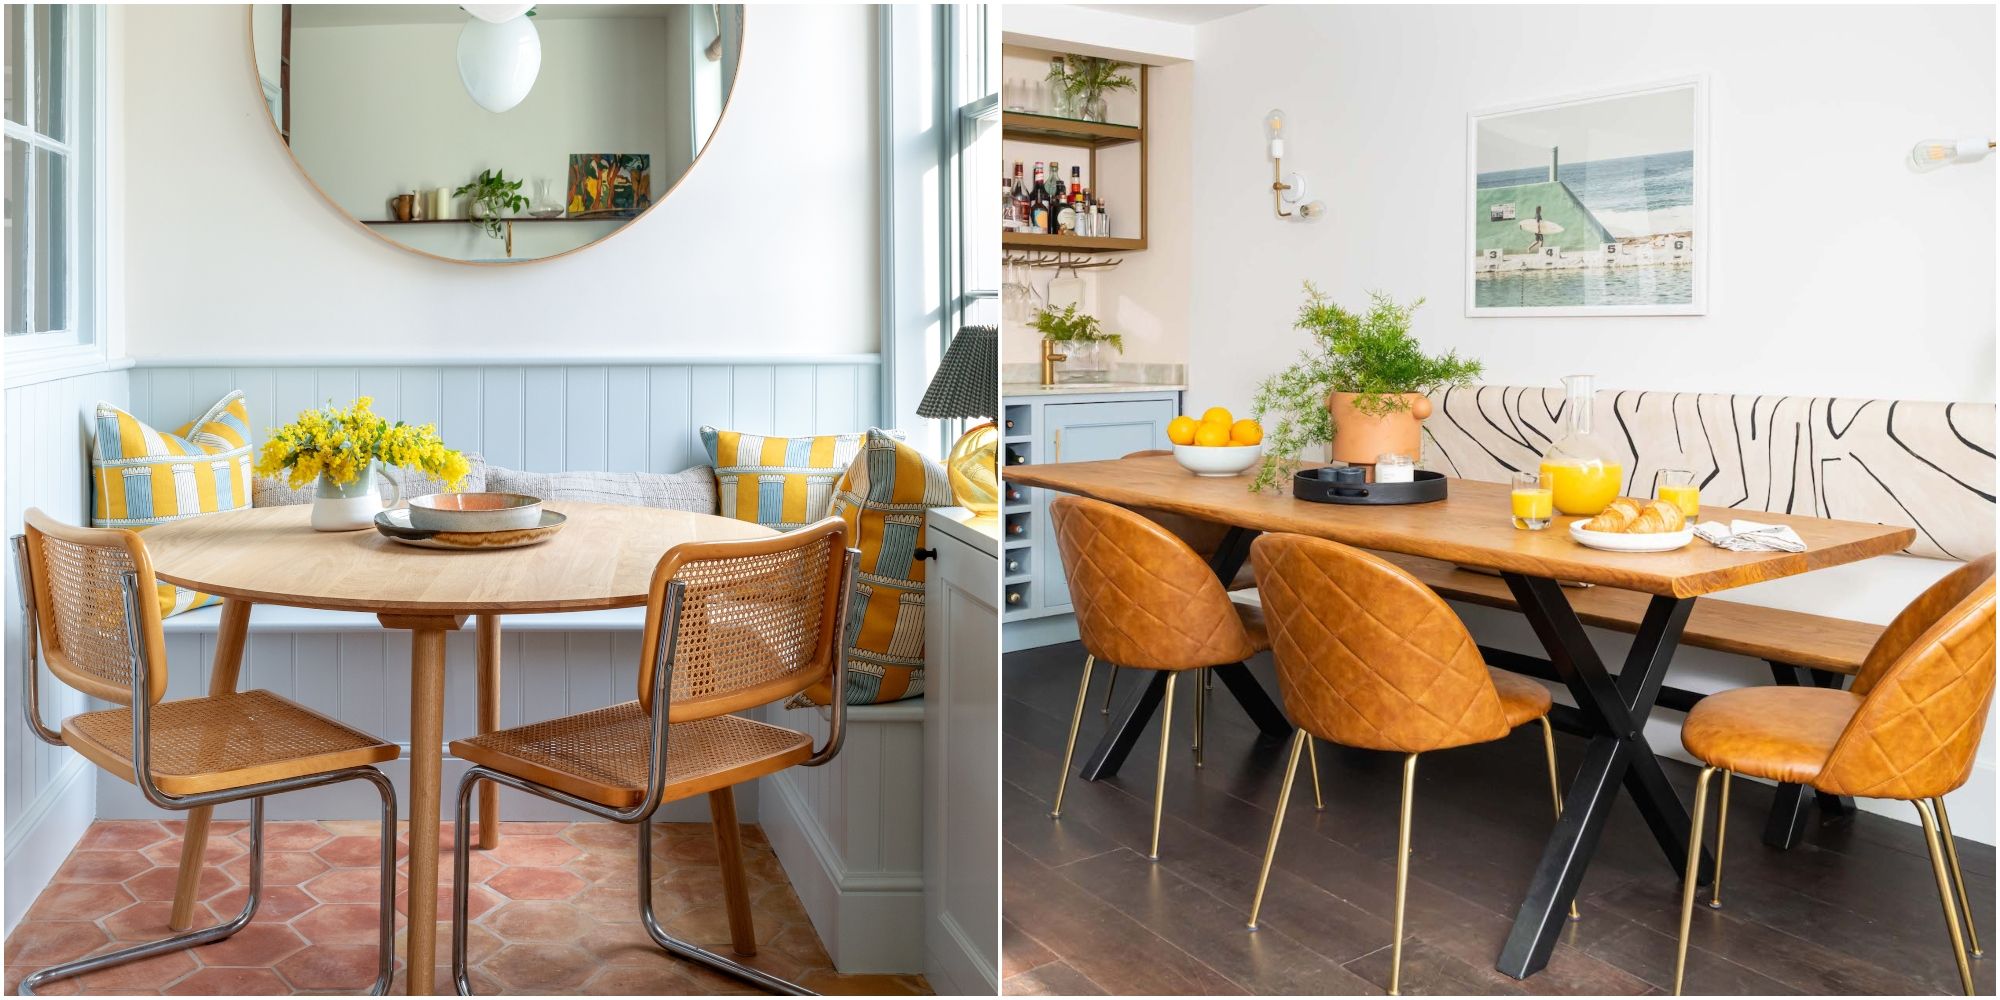 15 great uses for banquette seating in the home